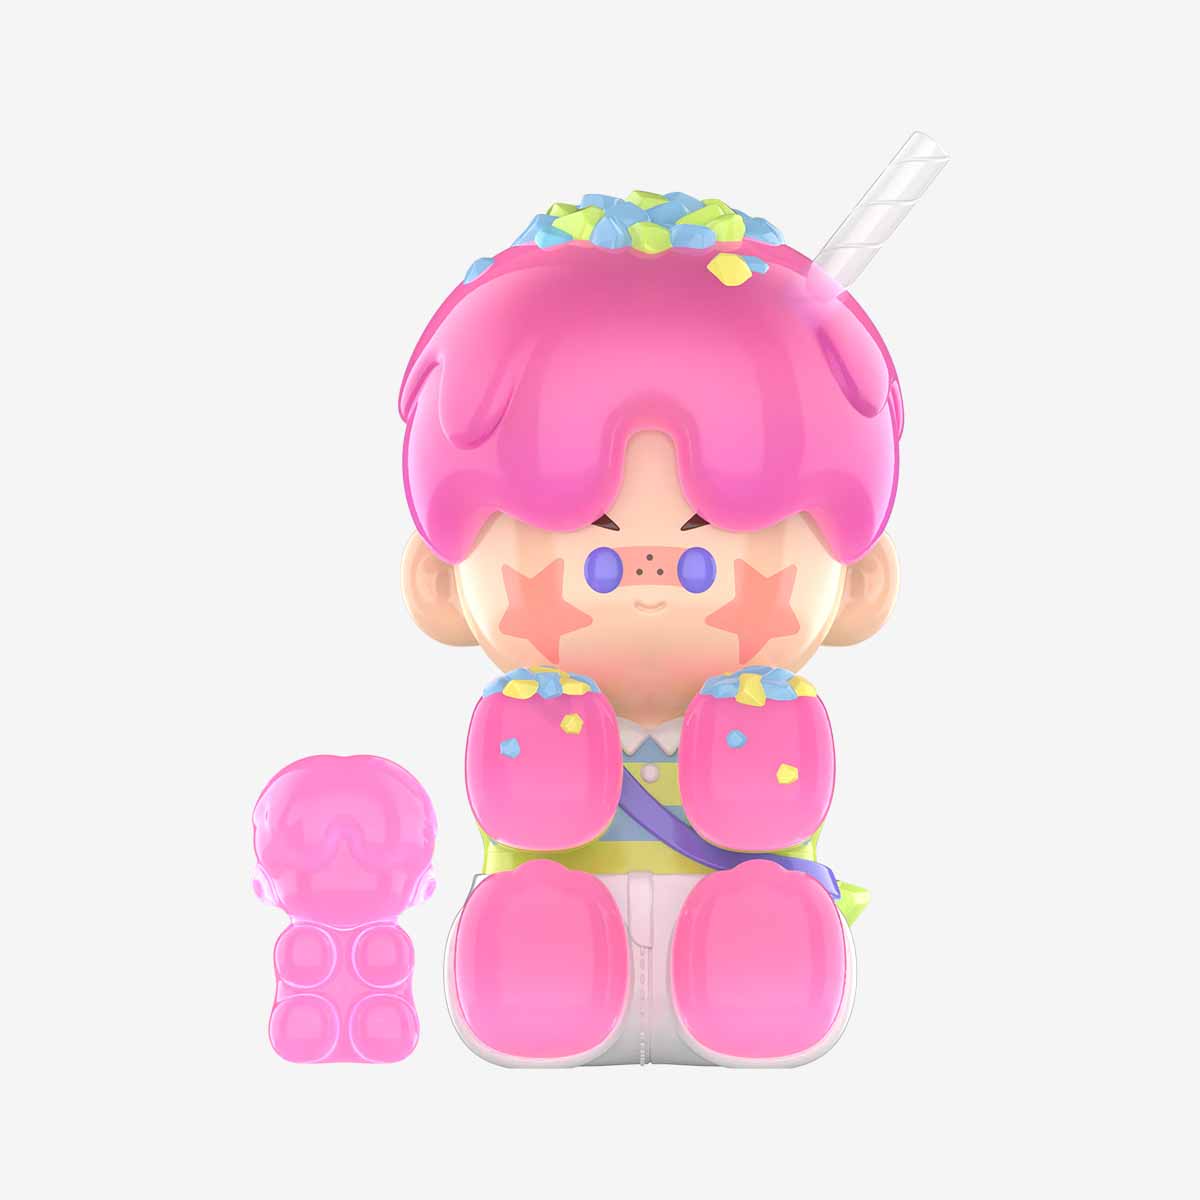 PINO JELLY Taste ＆ Personality Quiz Series Figures - Blind Box